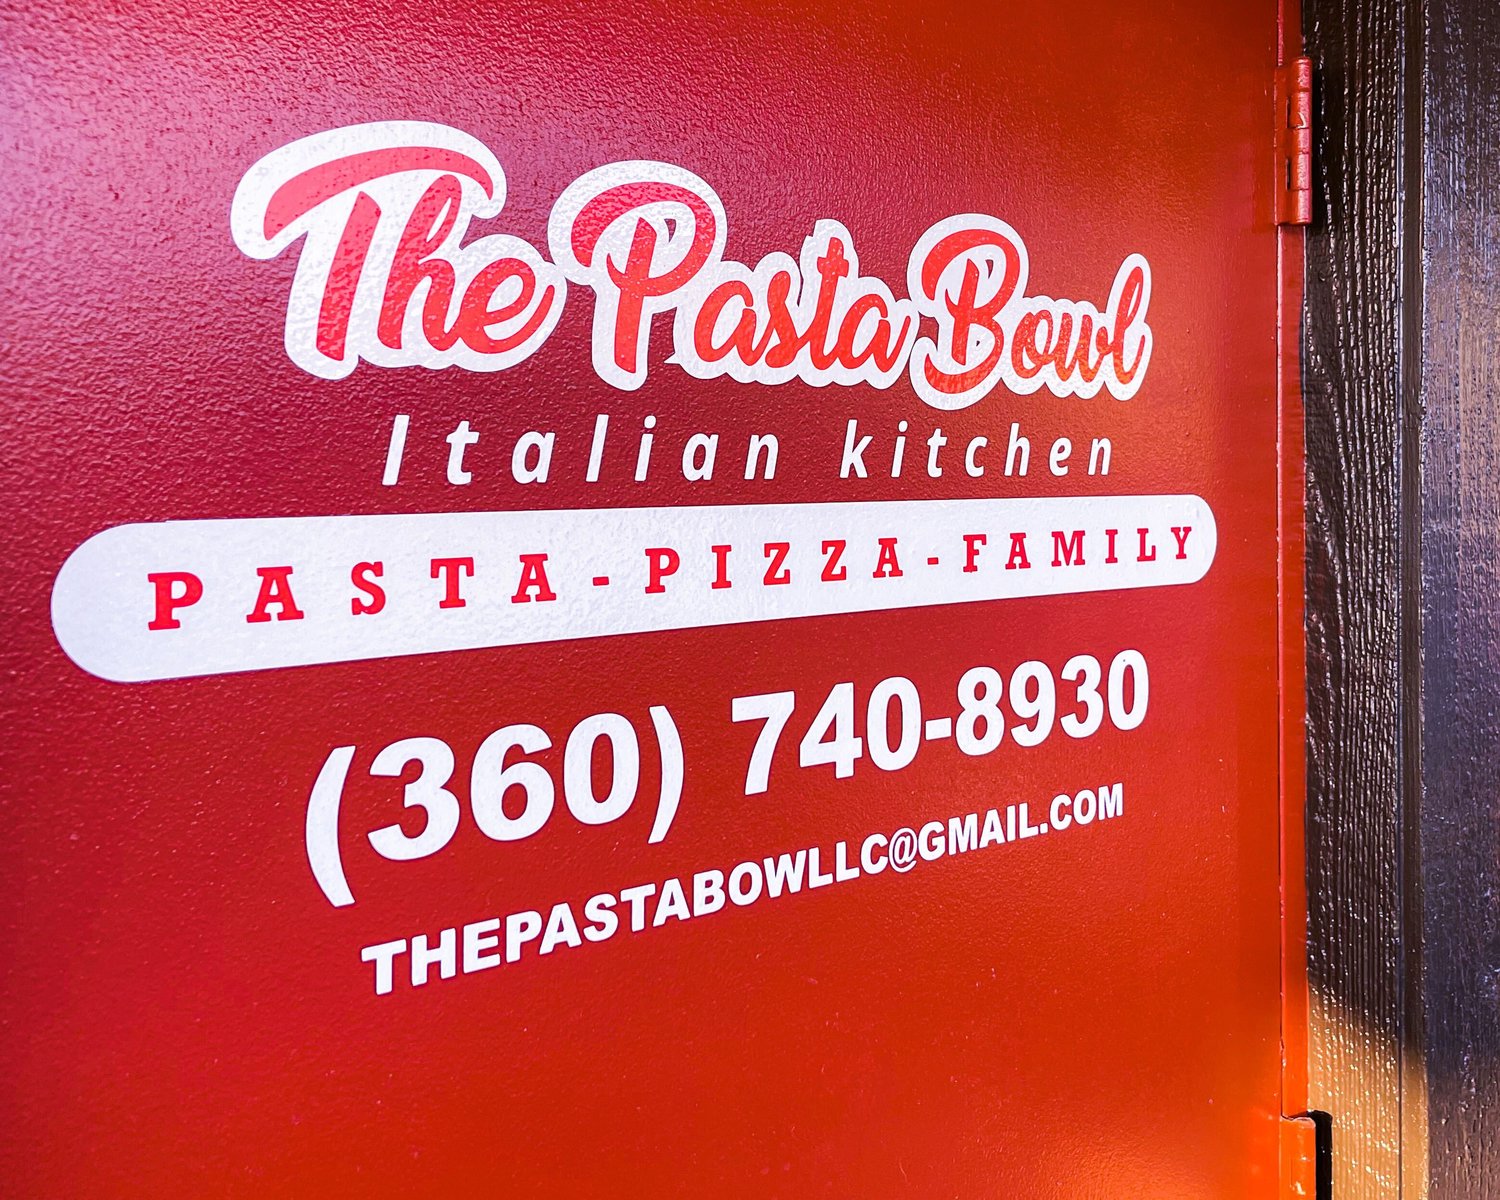 The Pasta Bowl Italian Kitchen is located at 1780 North National Avenue in Chehalis.